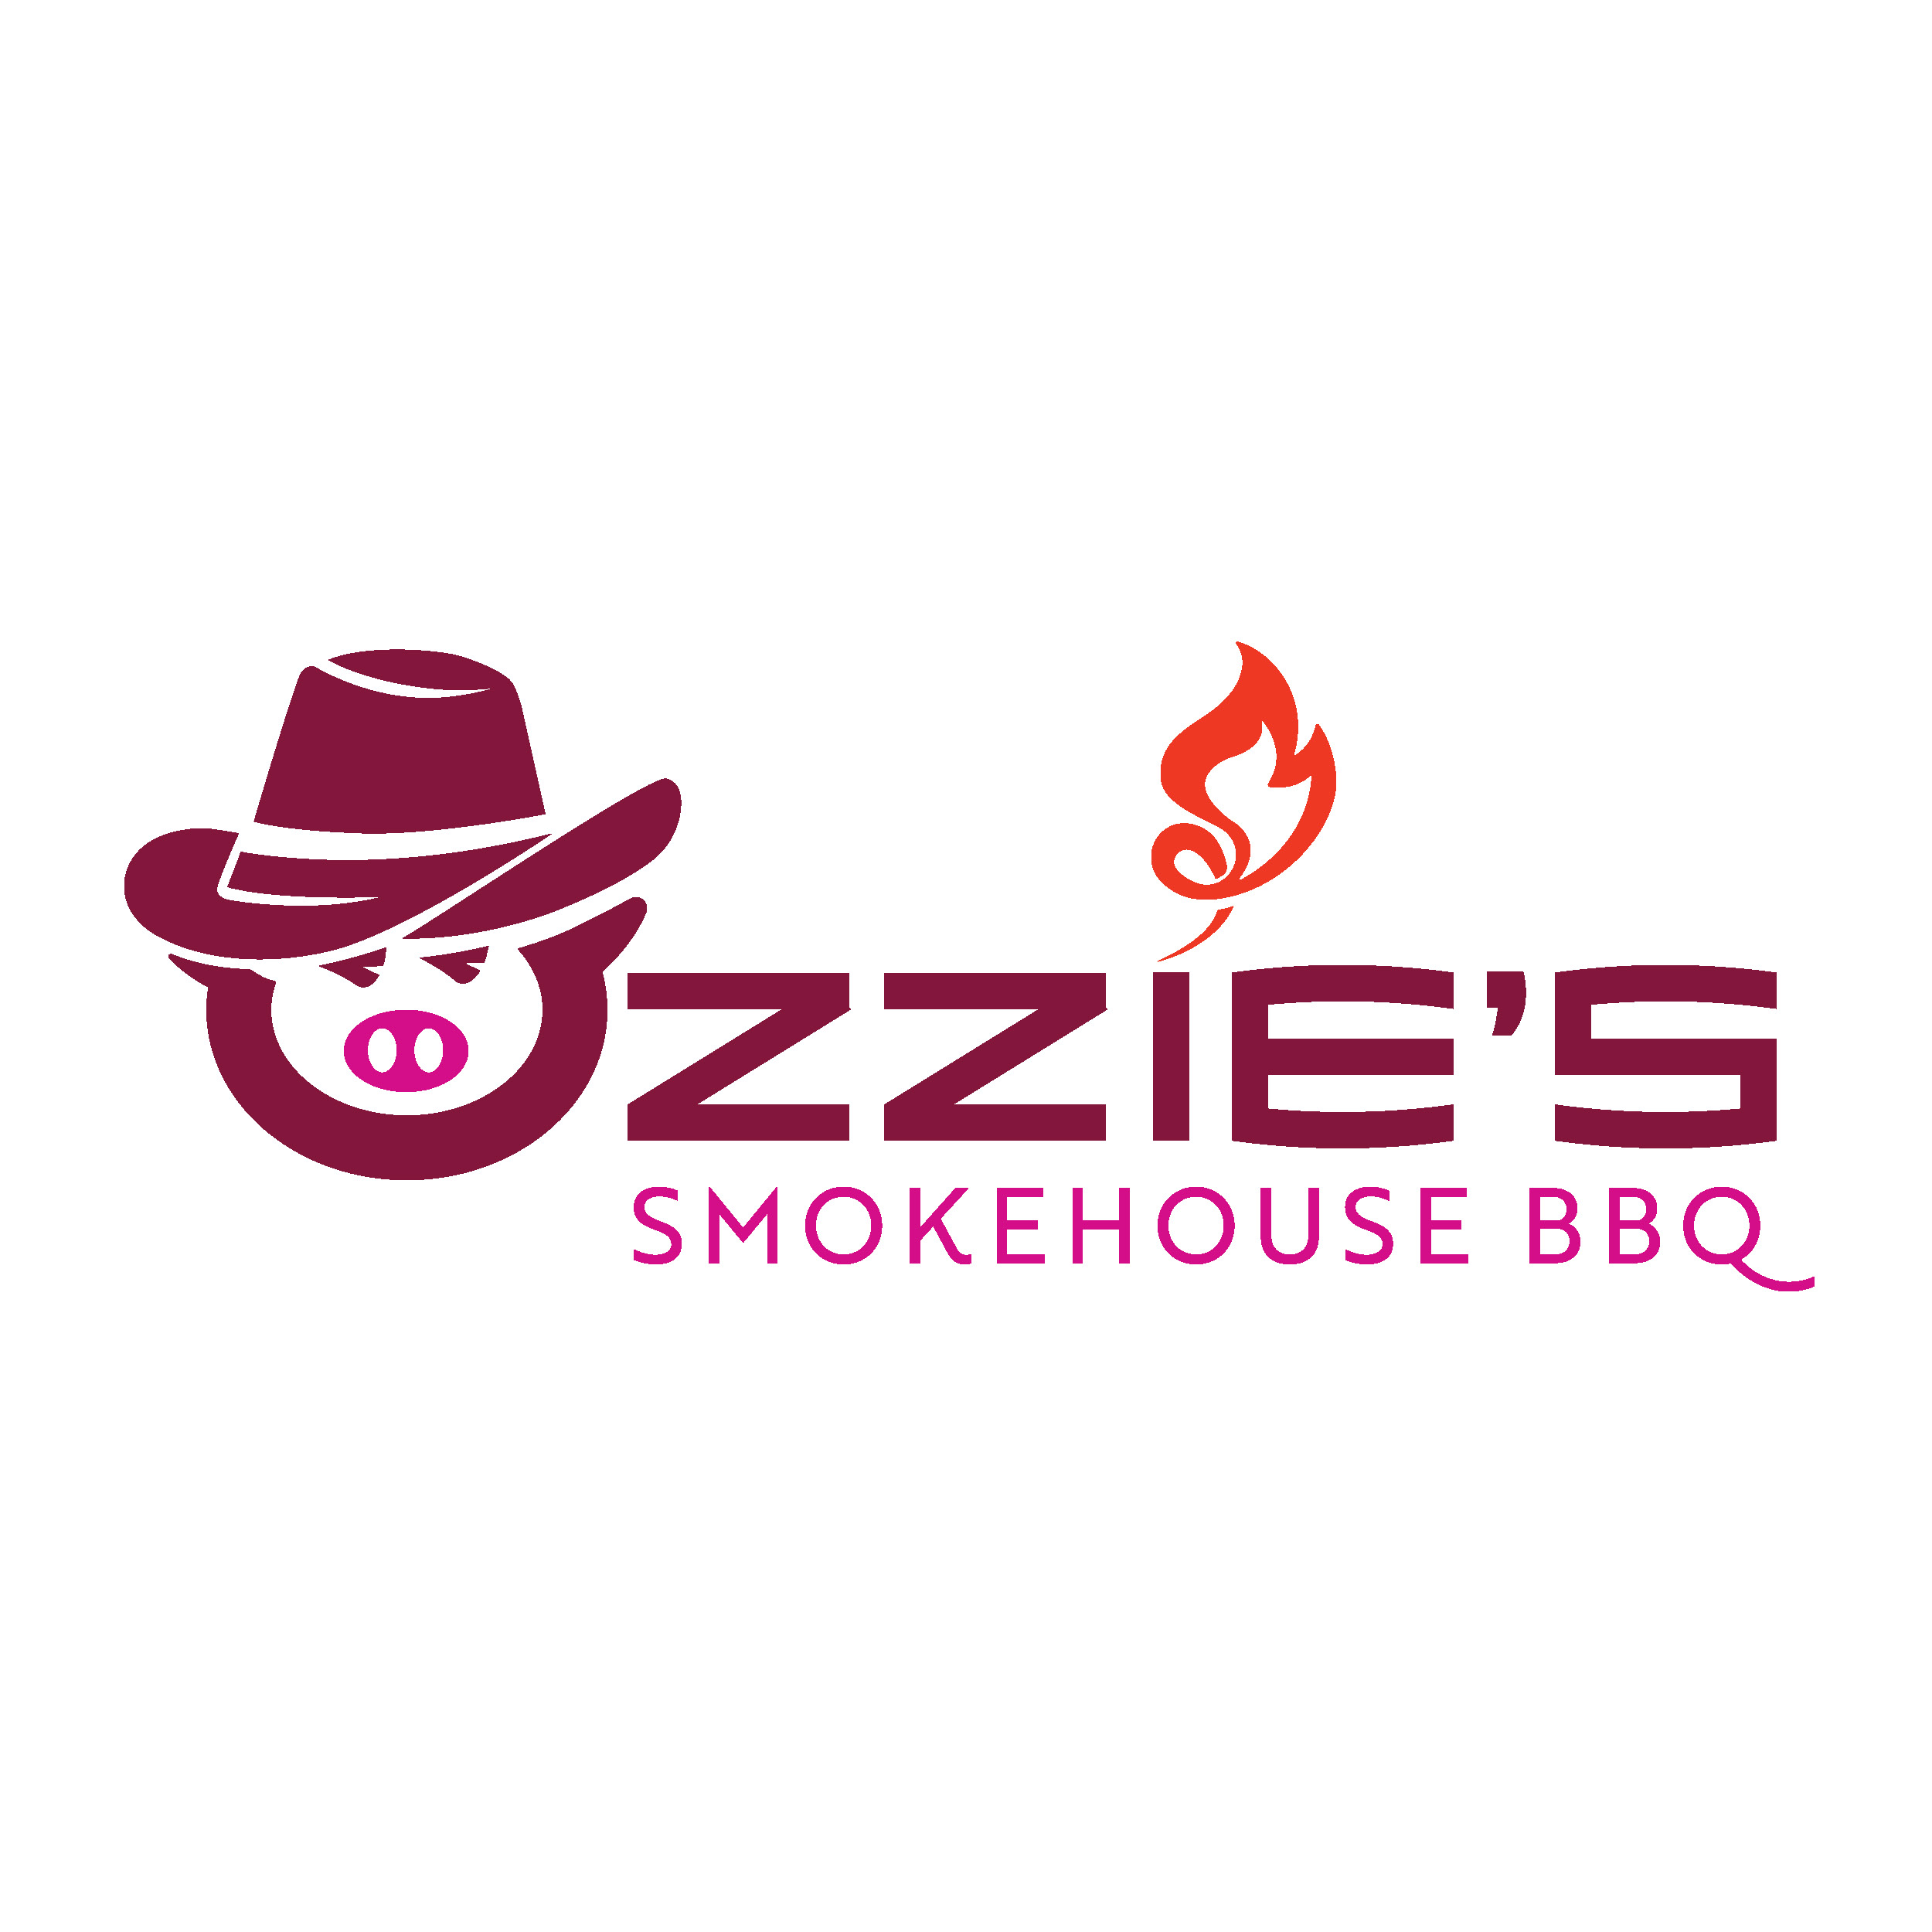 Ozzies_logo_horizontal logo design by logo designer Neon Pig Creative for your inspiration and for the worlds largest logo competition